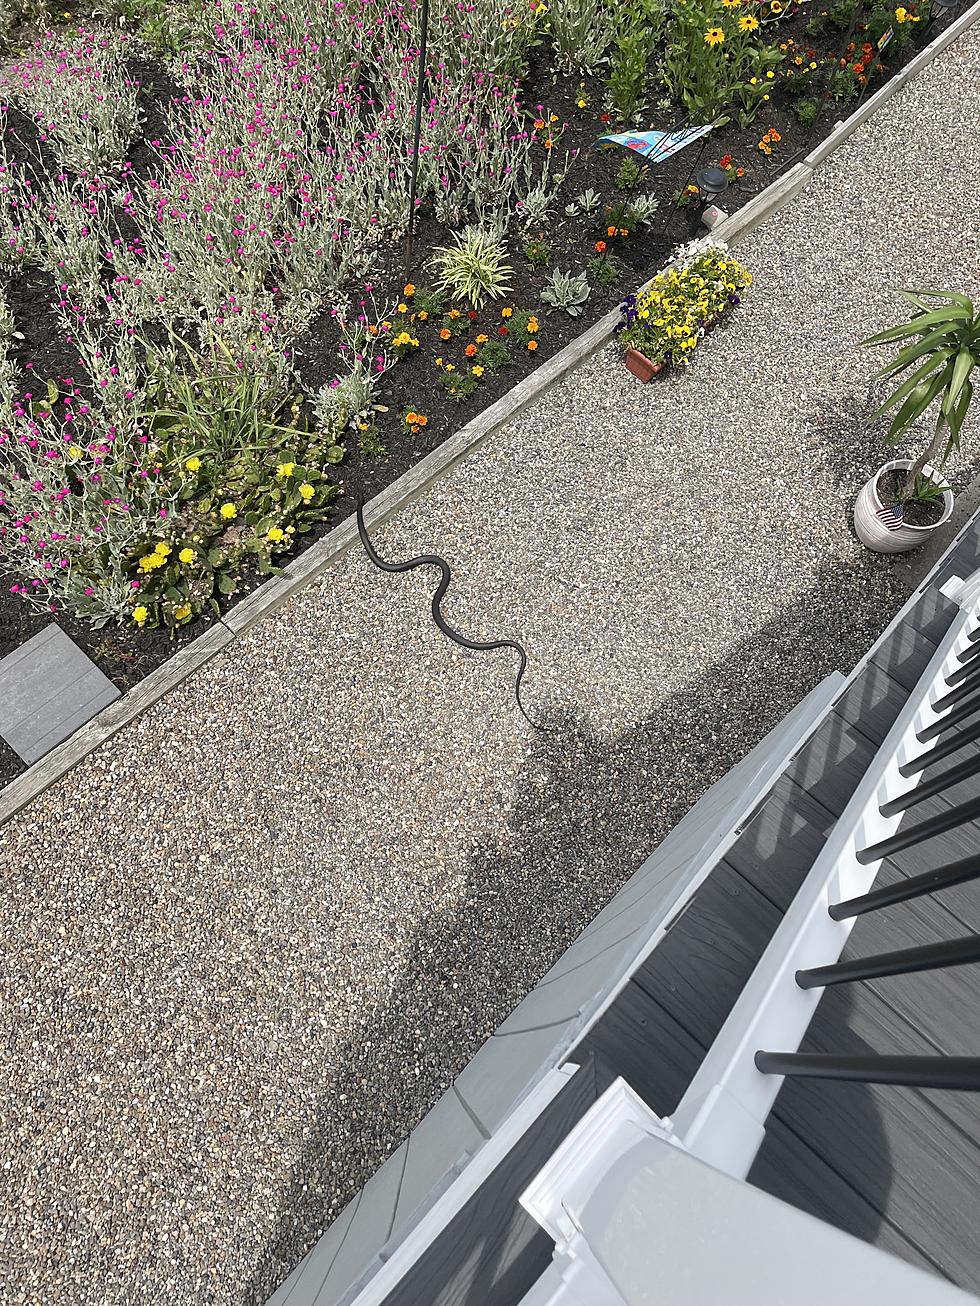 Ahhh! What Should We Name This Huge Seaside Park, New Jersey Rat Snake?